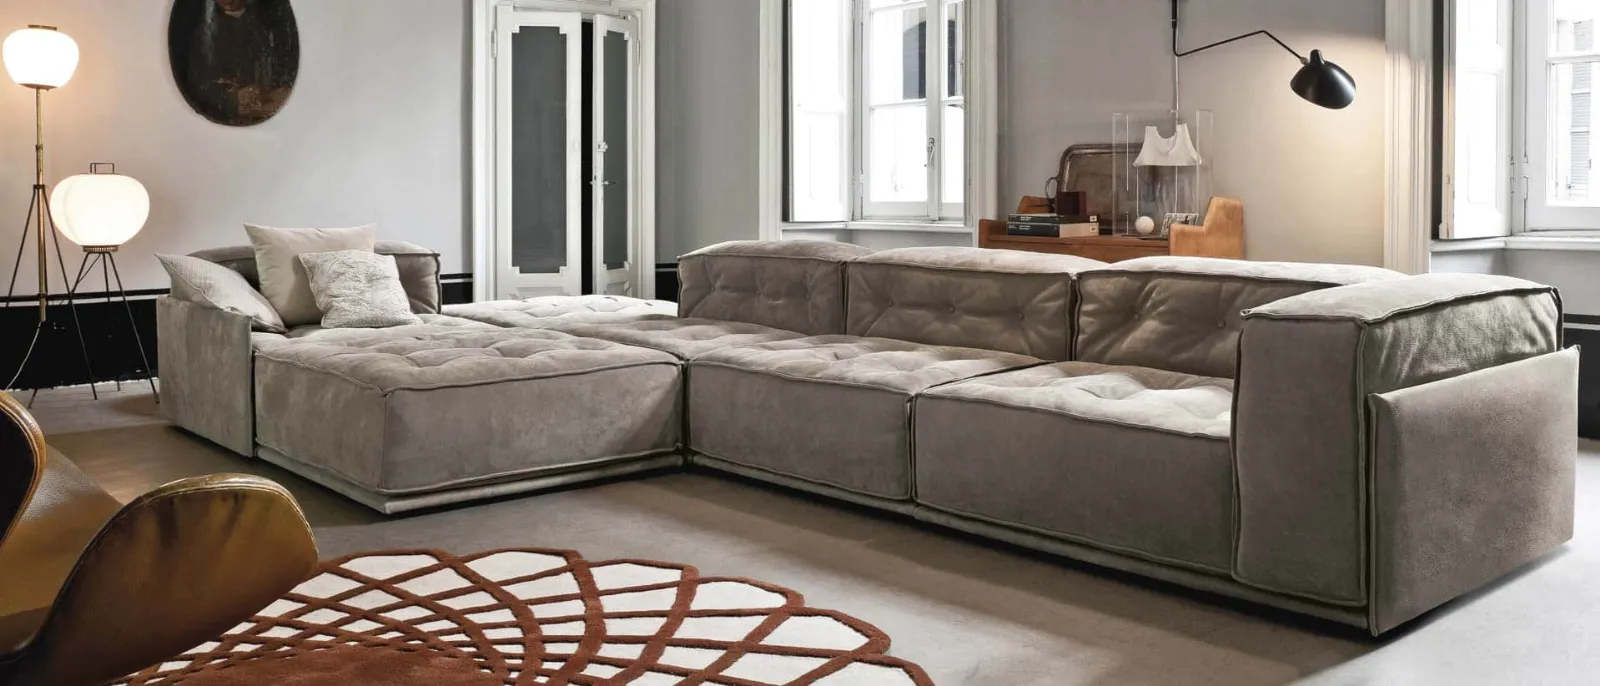 Montgomery paralysis liner Glamour. Modular leather sofa with buttons